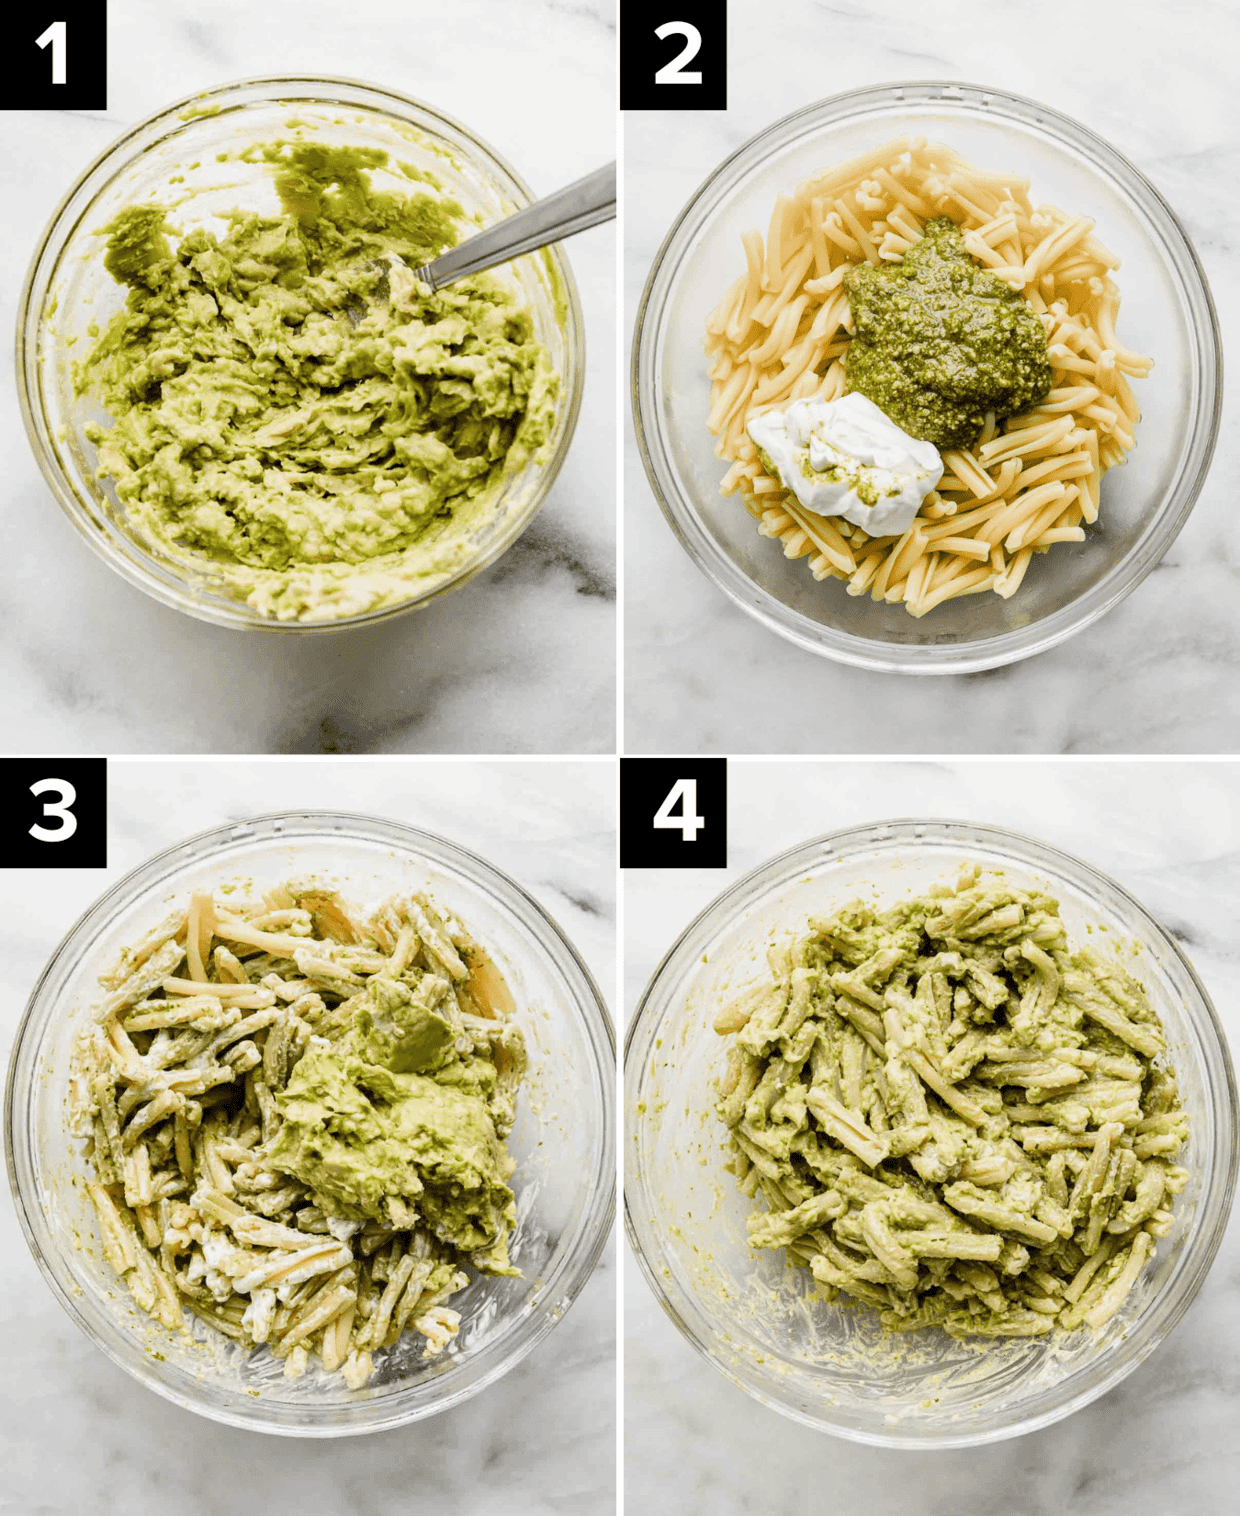 Four images showing how to make Avocado Pesto Pasta, top left is mashed avocado in glass bowl, top right is glass bowl with cooked pasta, sour cream and basil pesto, bottom left is noodles tossed in sour cream and pesto with mashed avocado on top, and bottom right is a glass bowl with Avocado Pesto Pasta in it.